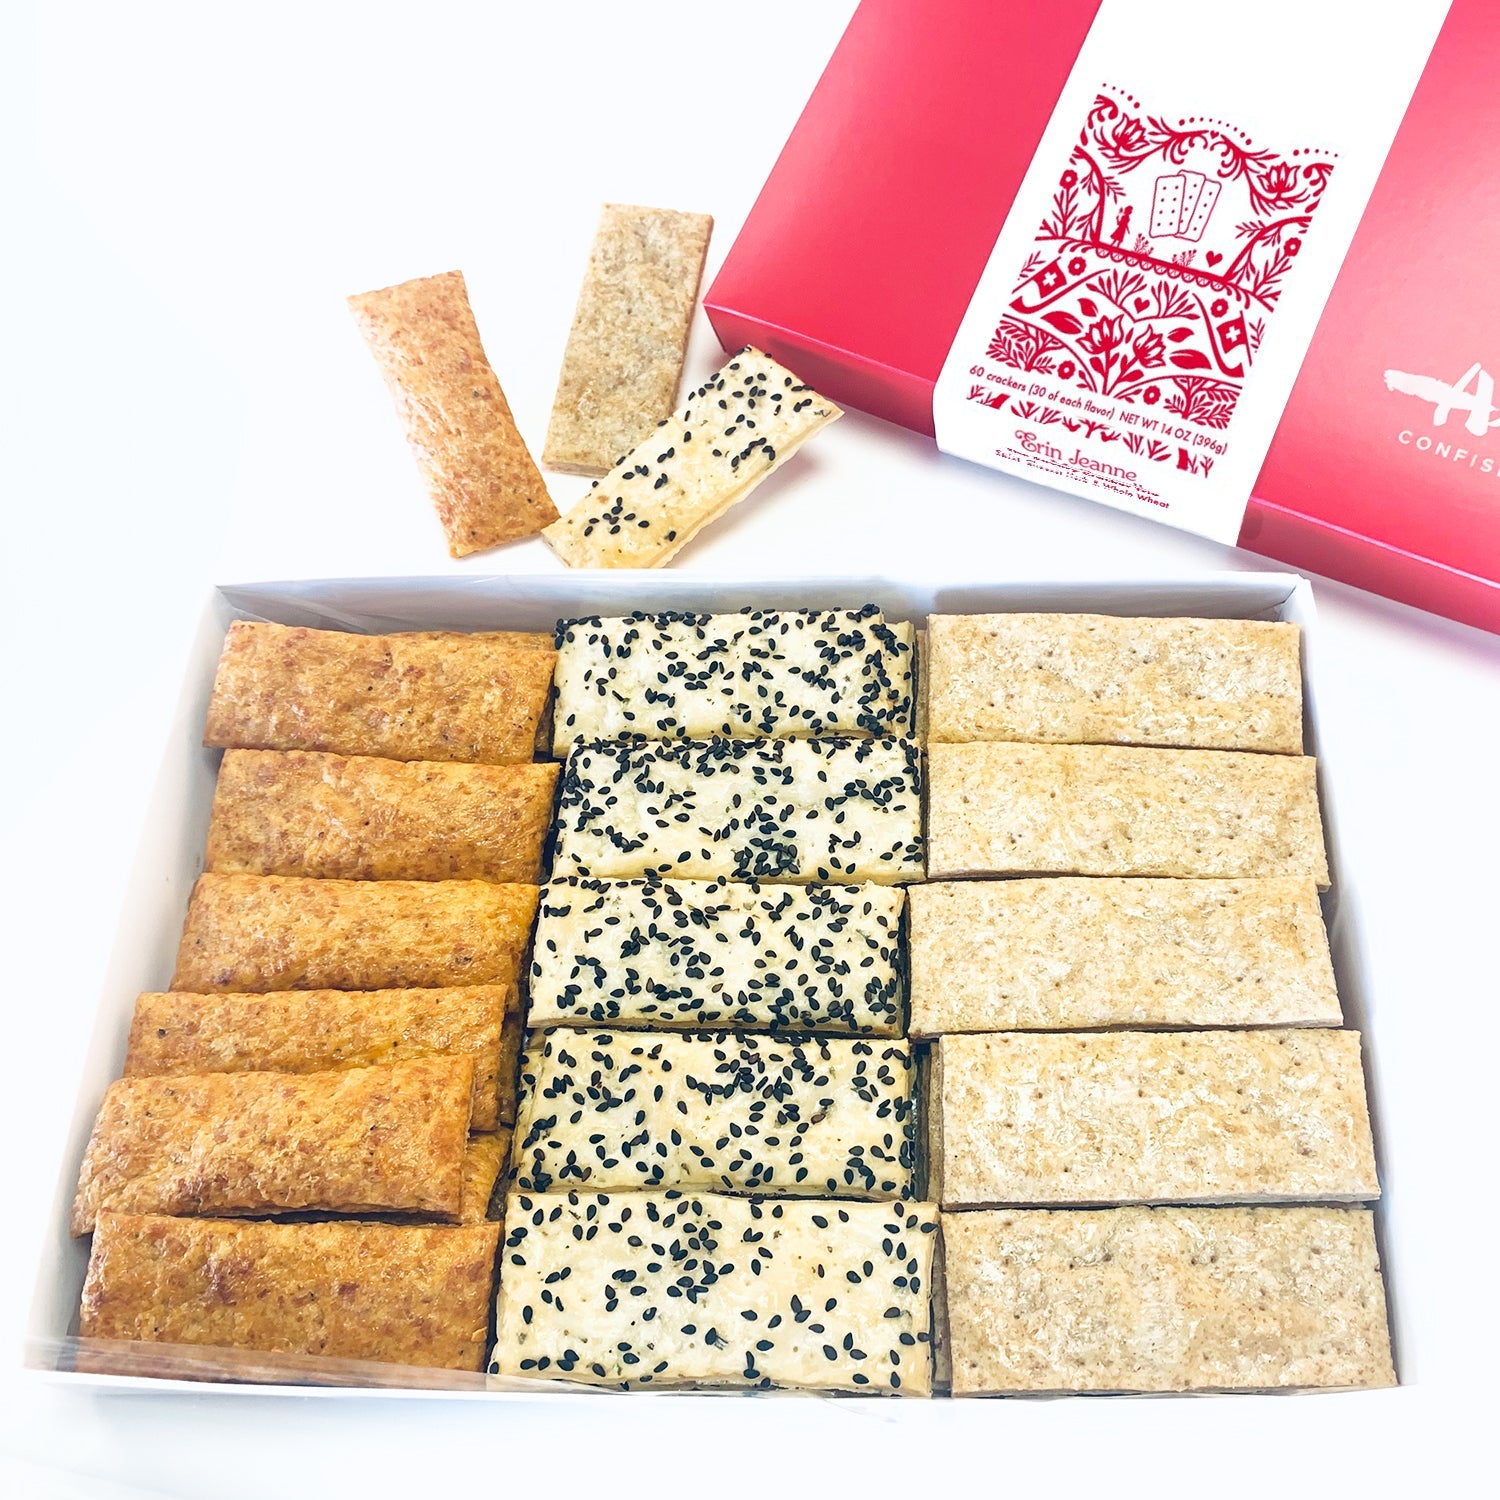 The Erin Jeanne McDowell Savory Cracker Bundle - SOLD OUT